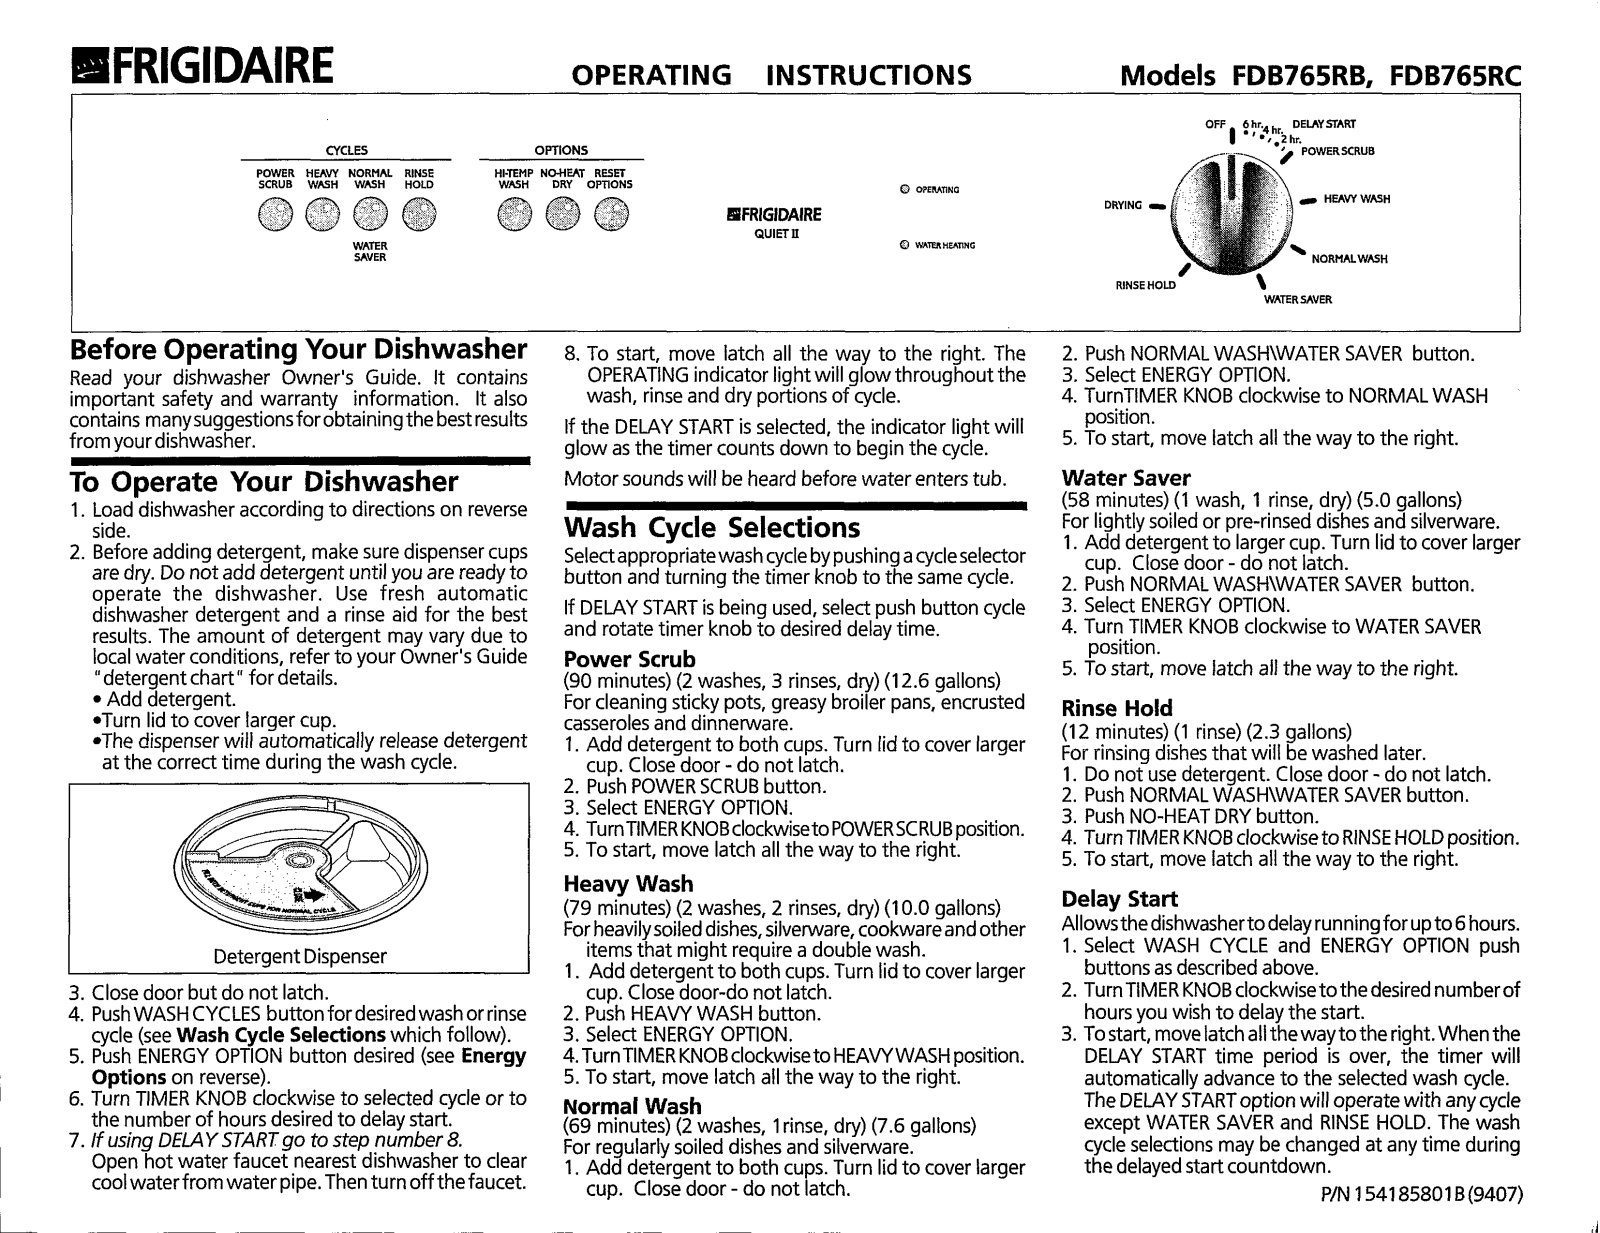 Frigidaire FDB765RC Owner's Guide